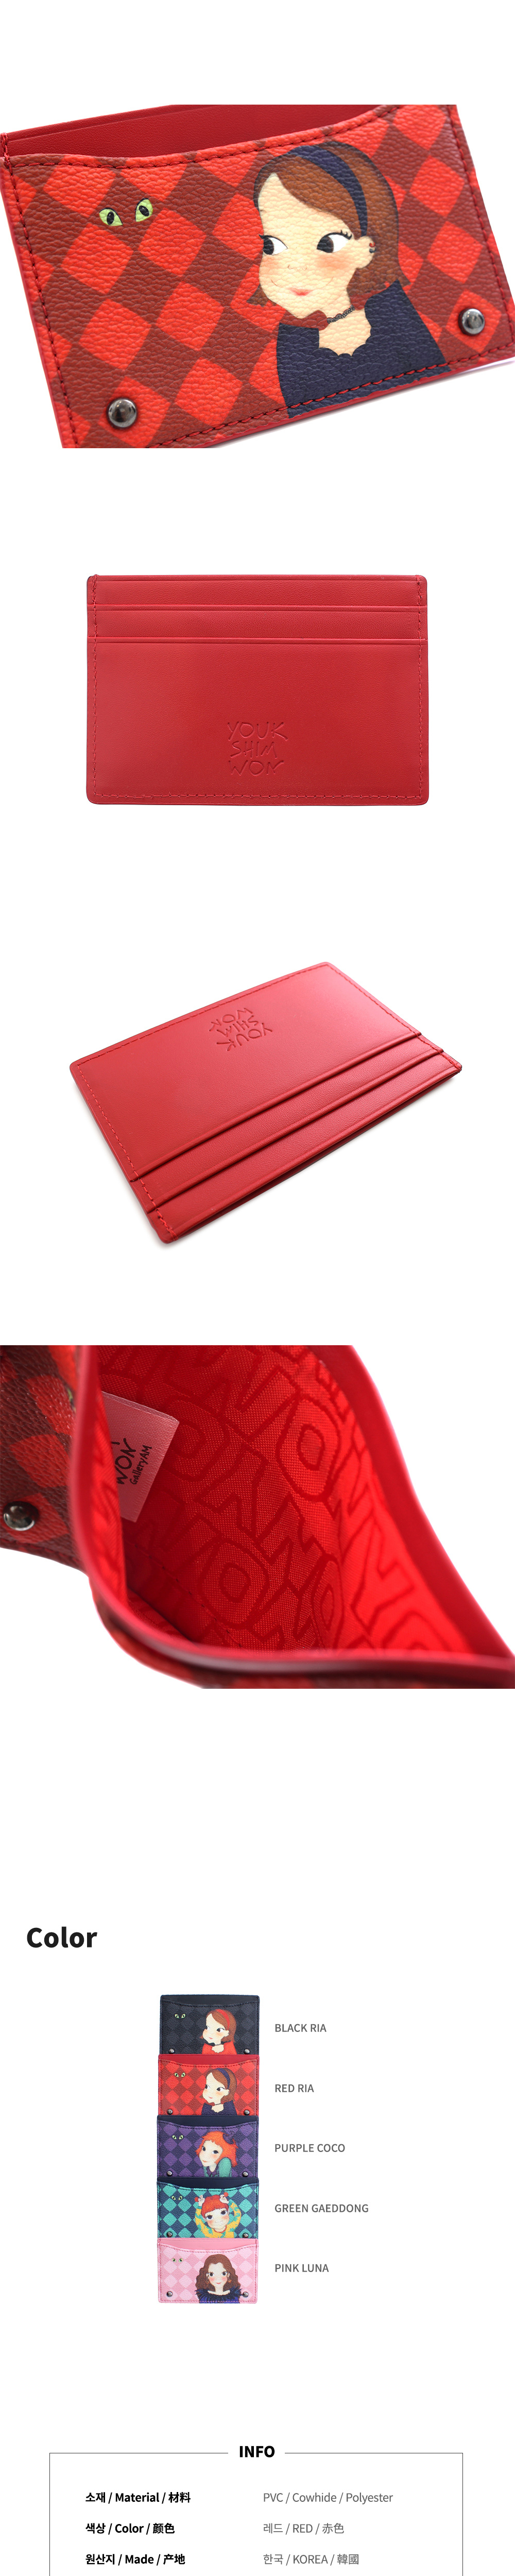 accessories red color image-S1L1